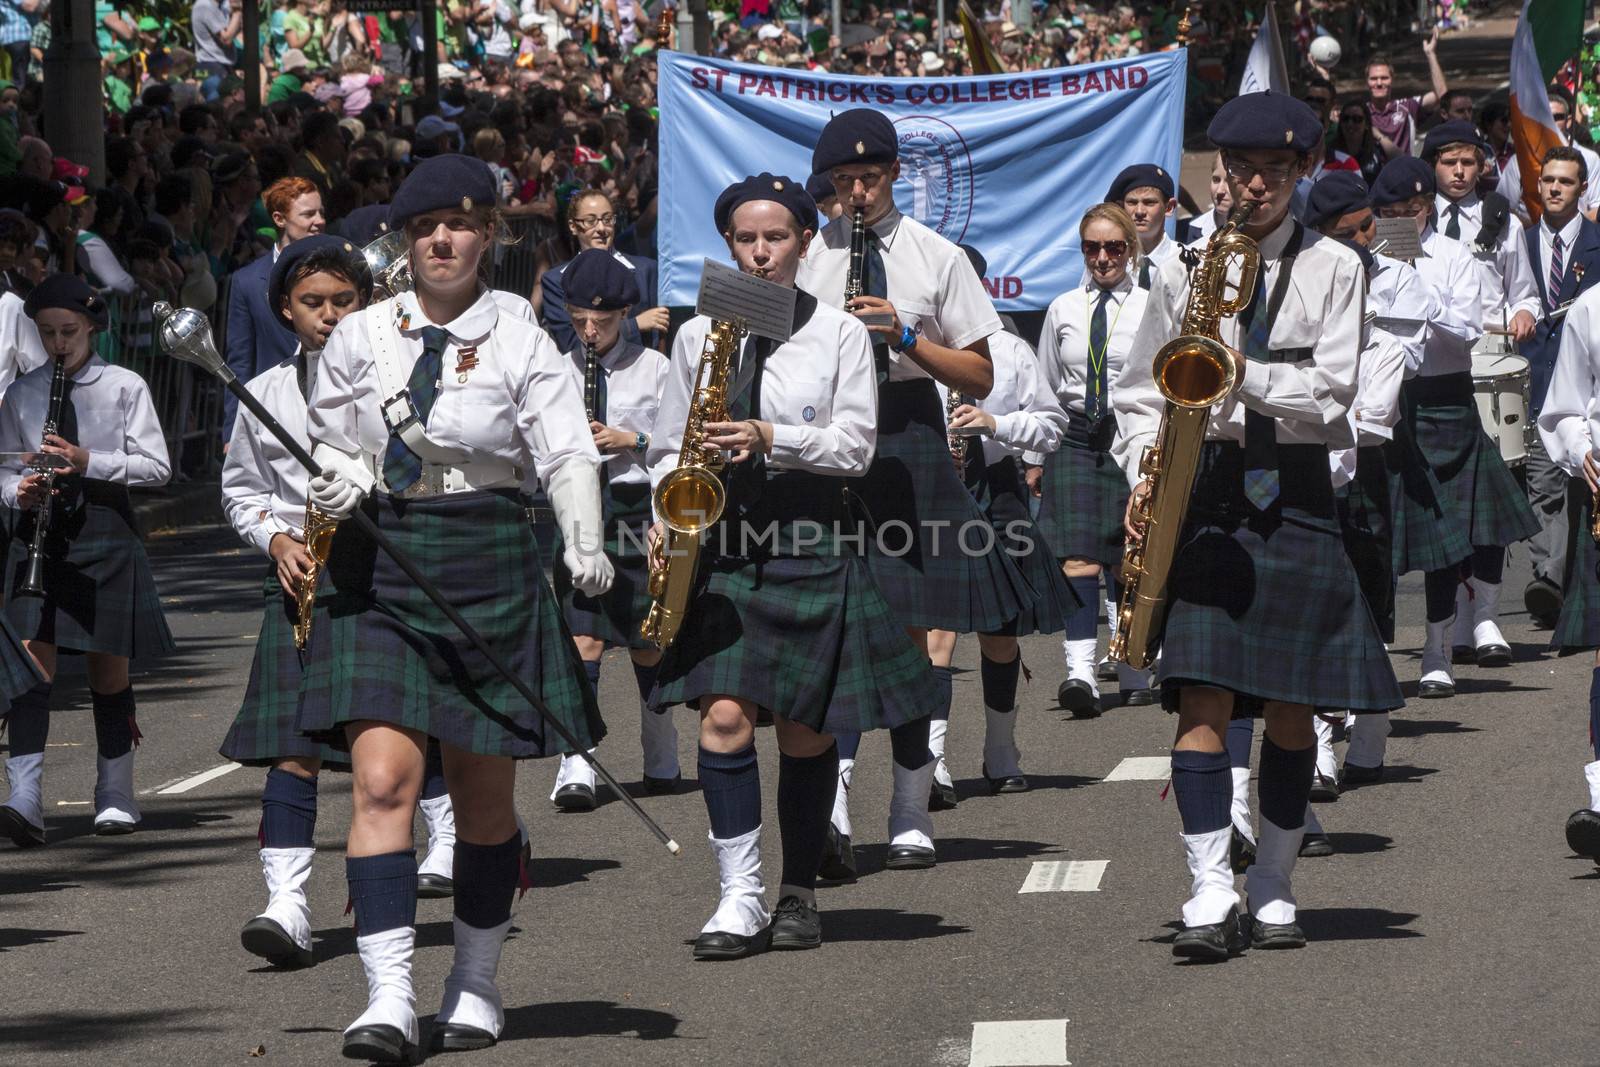 SYDNEY, AUSTRALIA - Mar 17TH: St Patrick's College band during the  St Patrick's Day parade on March 17th 2013. Australia has marked the occasion since 1810